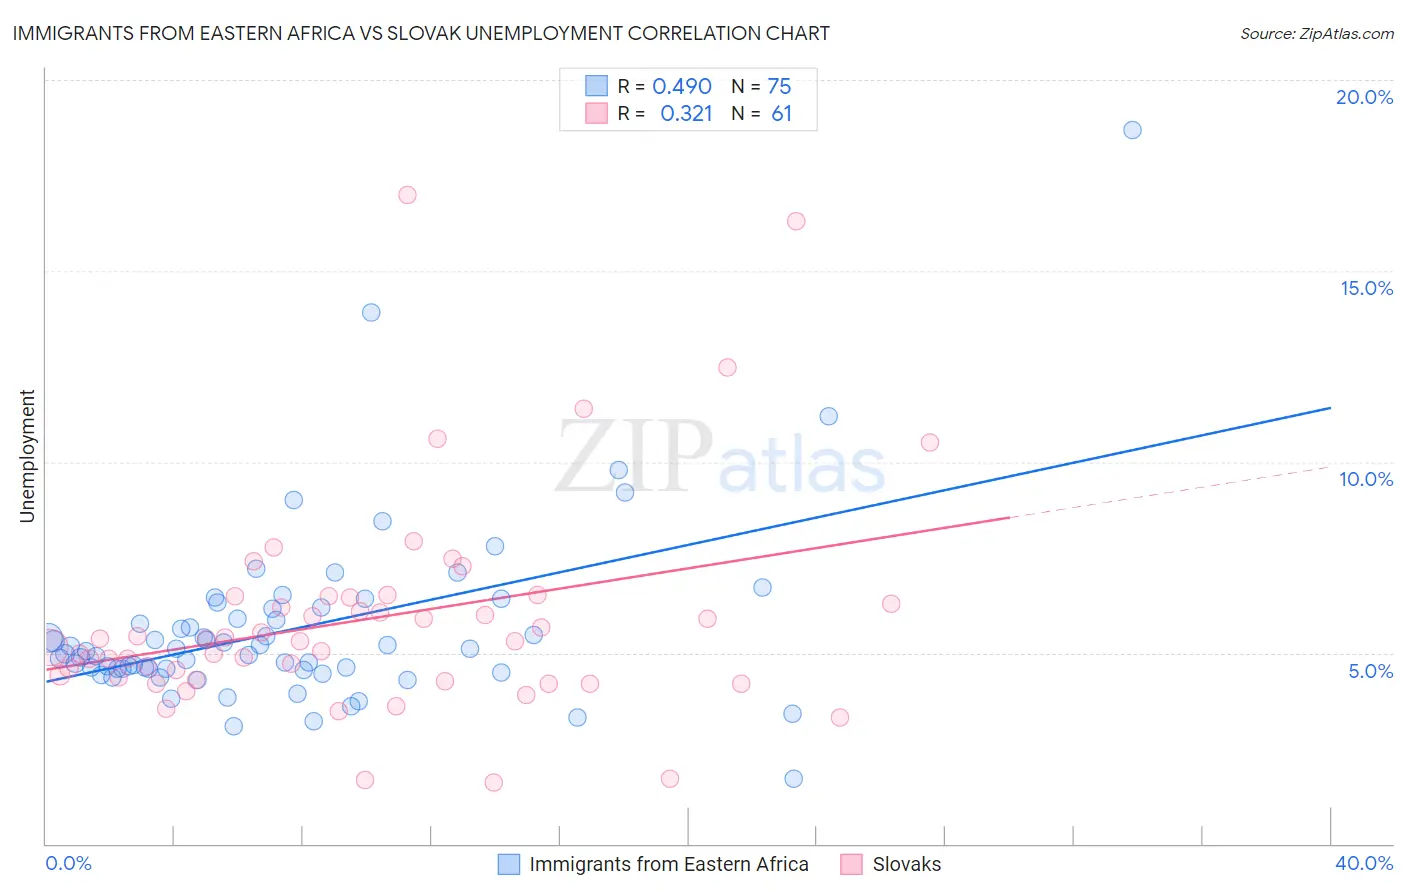 Immigrants from Eastern Africa vs Slovak Unemployment